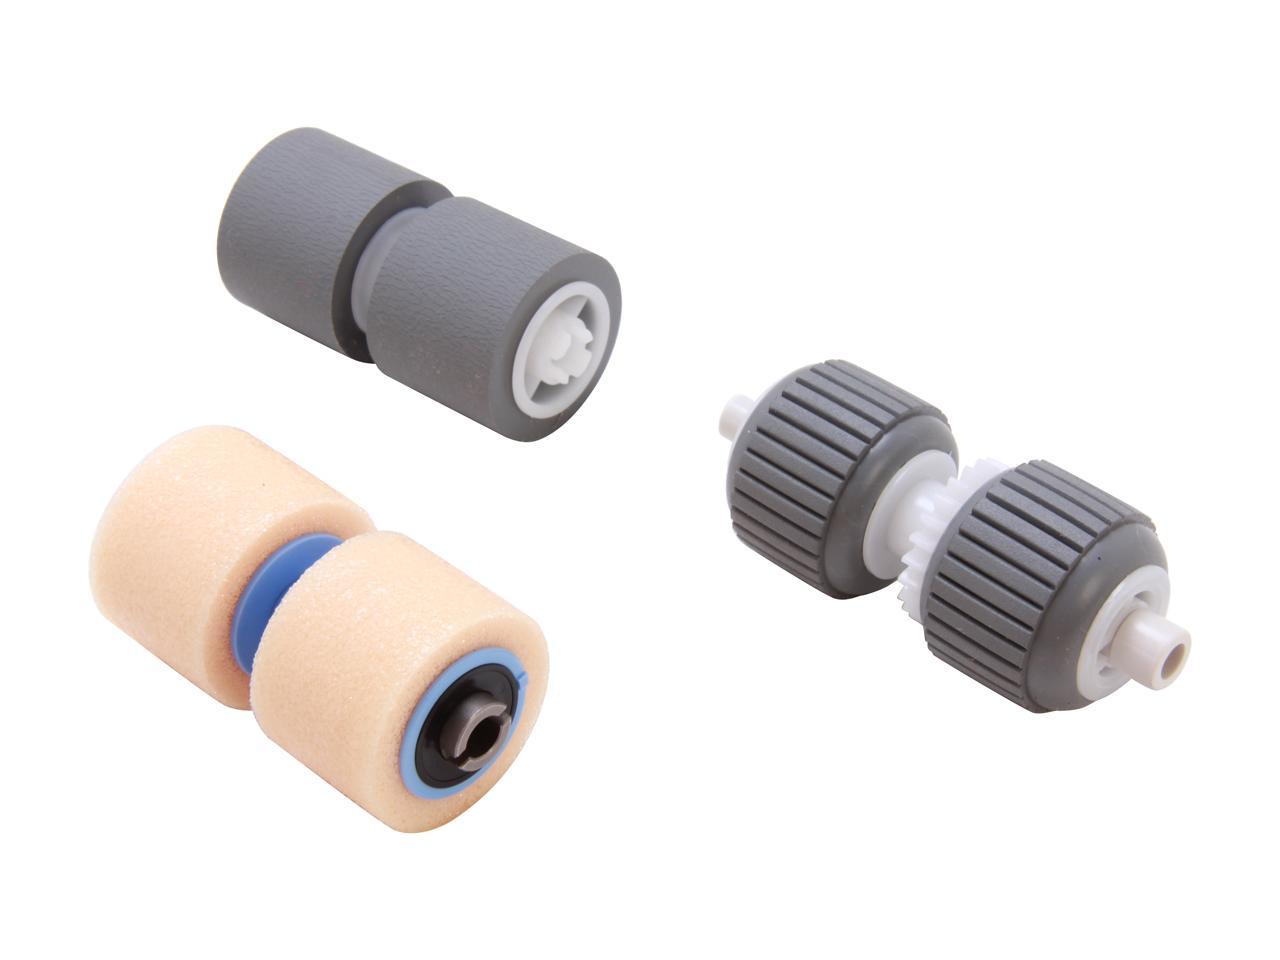 Canon Canon 4009B001 Exchange Roller Kit - image 1 of 3